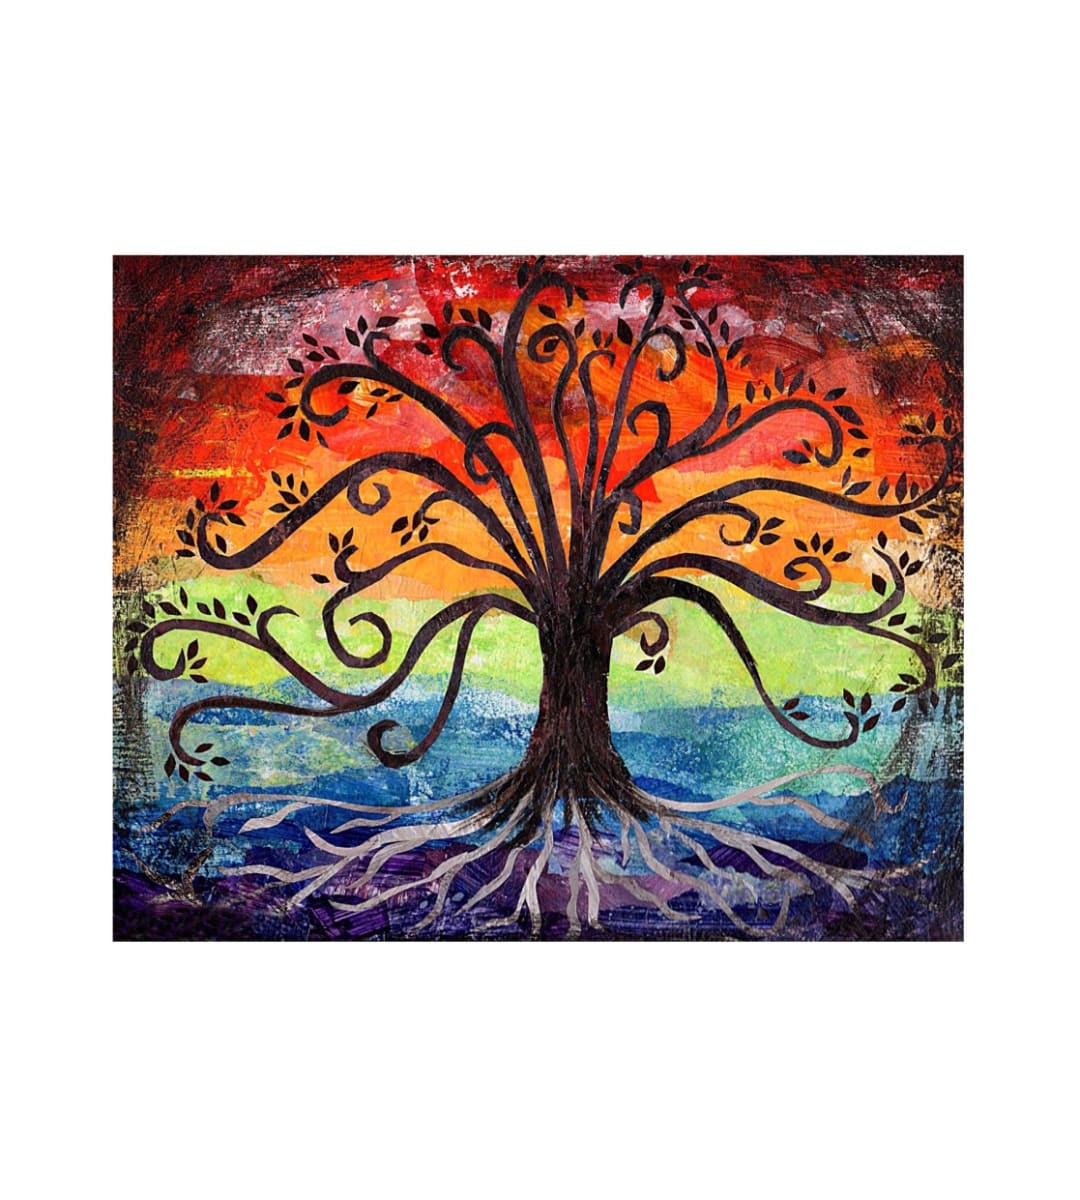 Tree of Life- LOVE  Image: The first in a new series - ‘Tree of Life-Love’ is my desire to put forth artwork that resonates love, peace and harmony. Love always wins. 